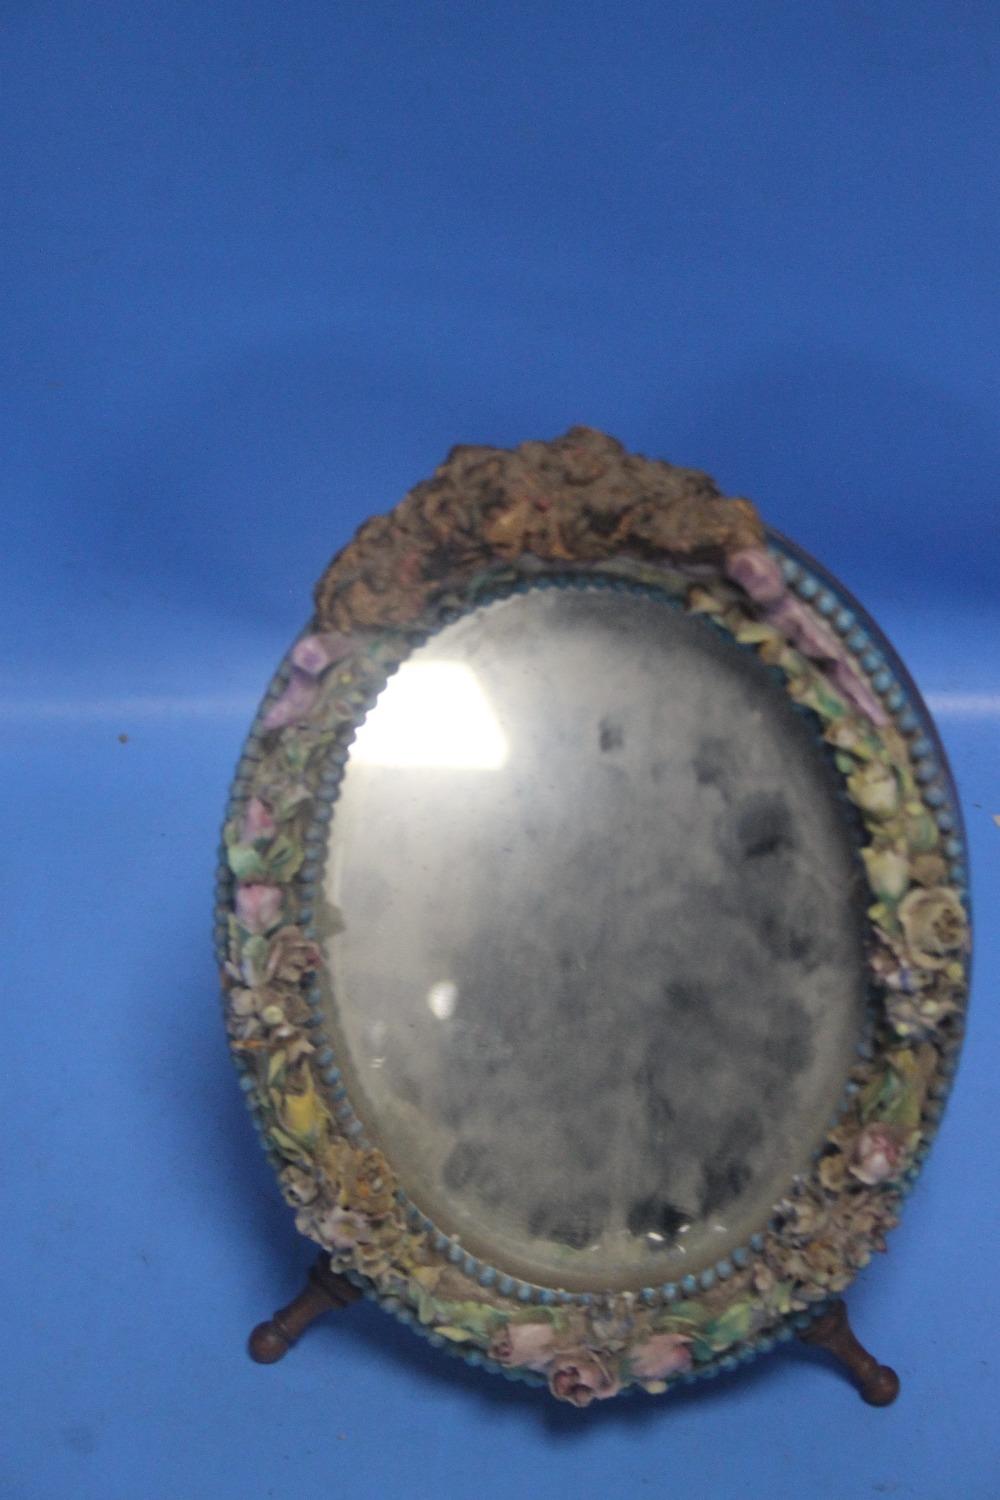 A SMALL DECORATIVE MIRROR TOGETHER WITH A QUANTITY OF MARBLES - Image 2 of 3